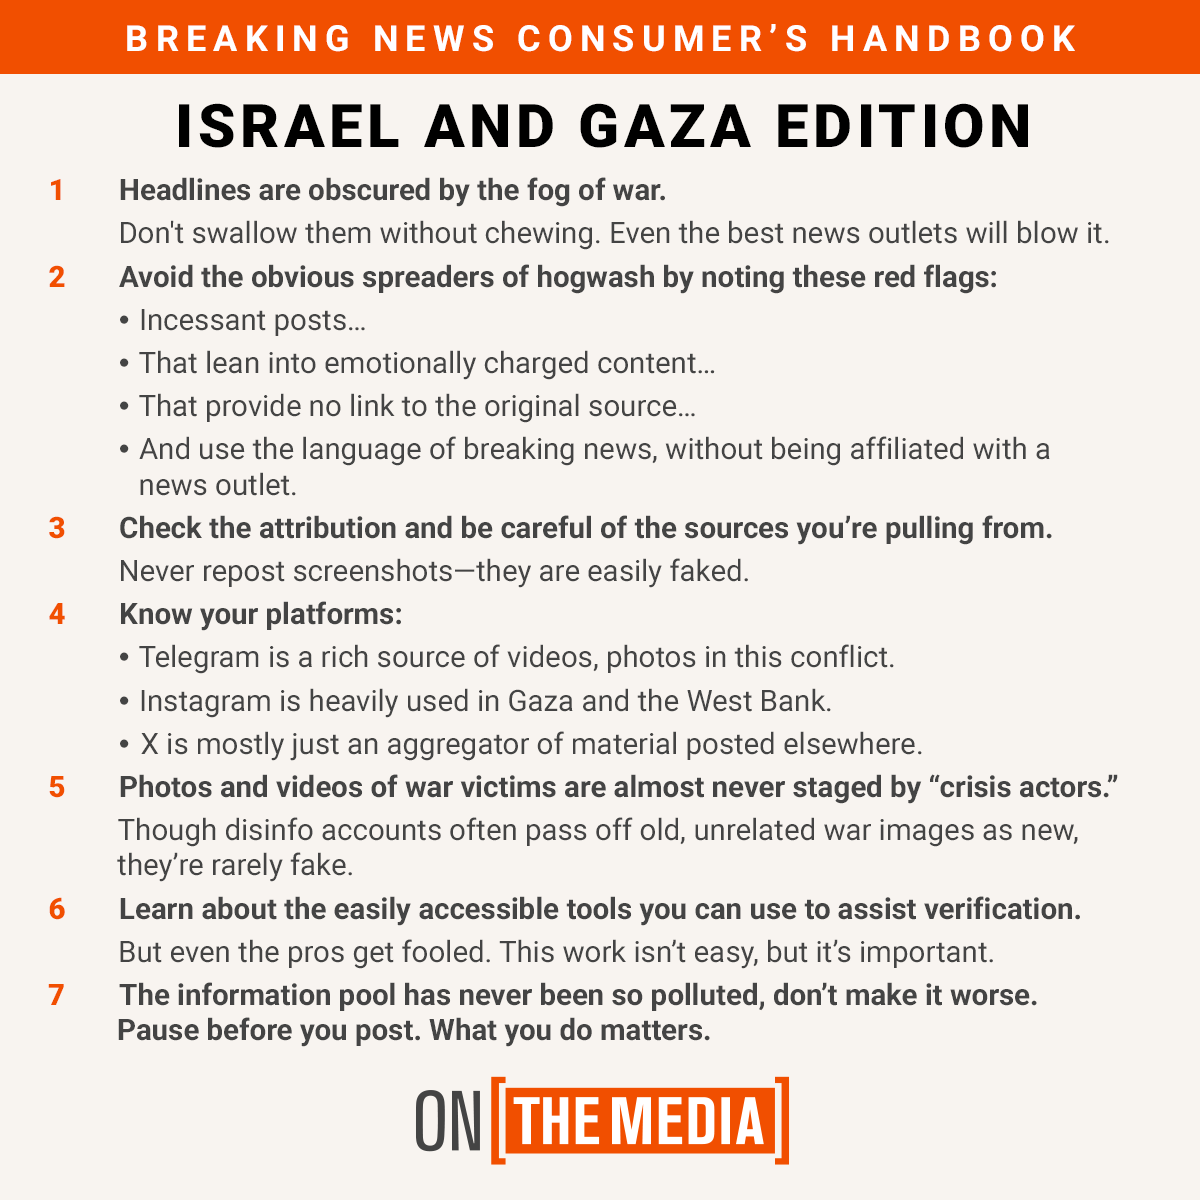 You asked, we delivered. Presenting a new Breaking News Consumer’s Handbook: Israel and Gaza Edition. Ft. @uwcip’s Michael Caulfield, @AricToler, & @Shayan86 bit.ly/3QhcnXw